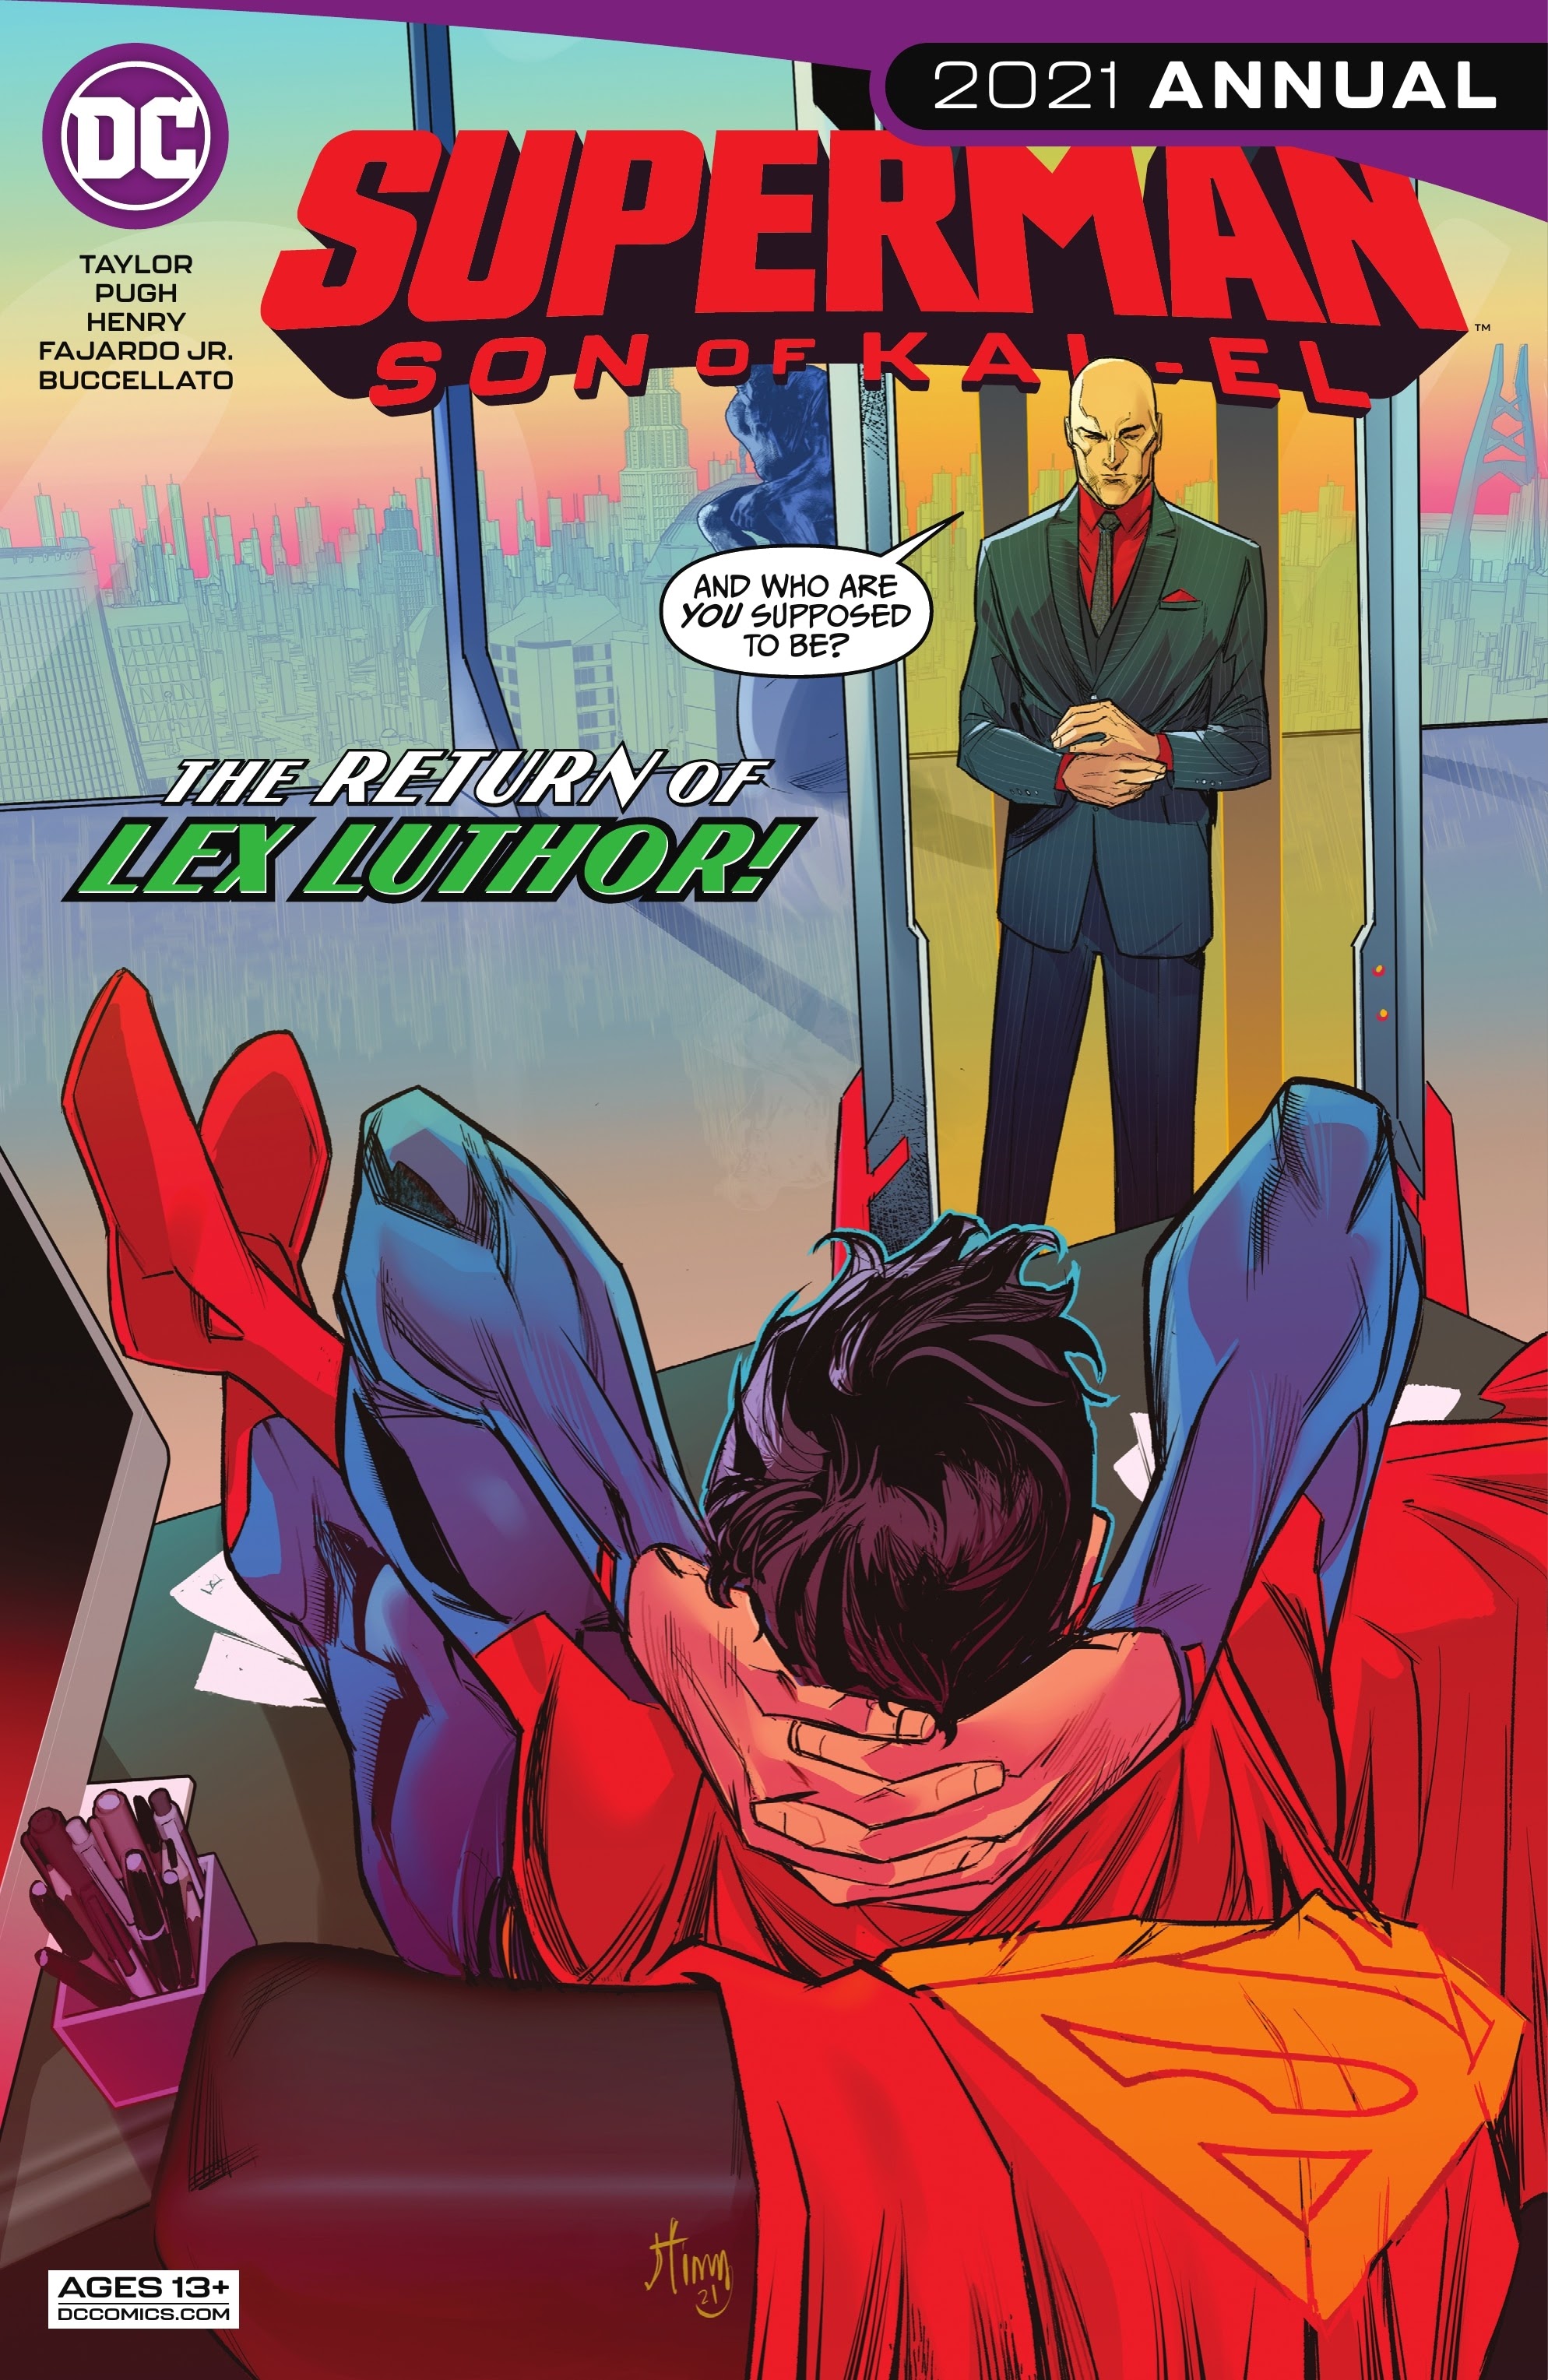 Read online Superman: Son of Kal-El comic -  Issue # _2021 Annual - 1